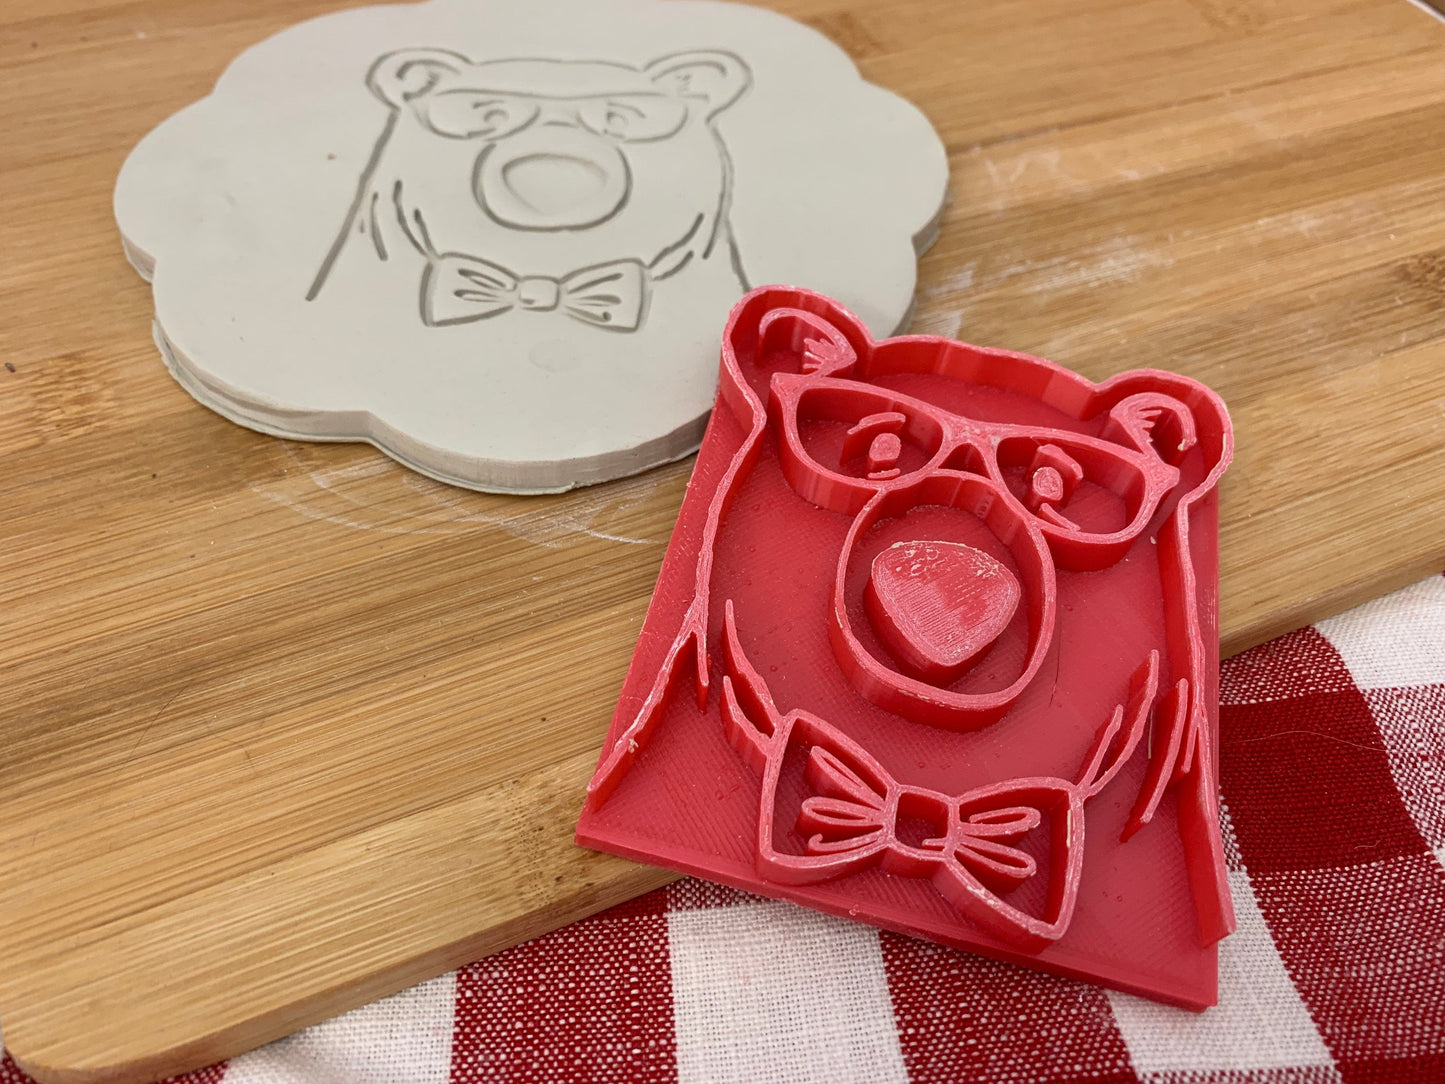 Bear Face w/ glasses or floral wreath pottery stamp - plastic 3d printed, multiple sizes